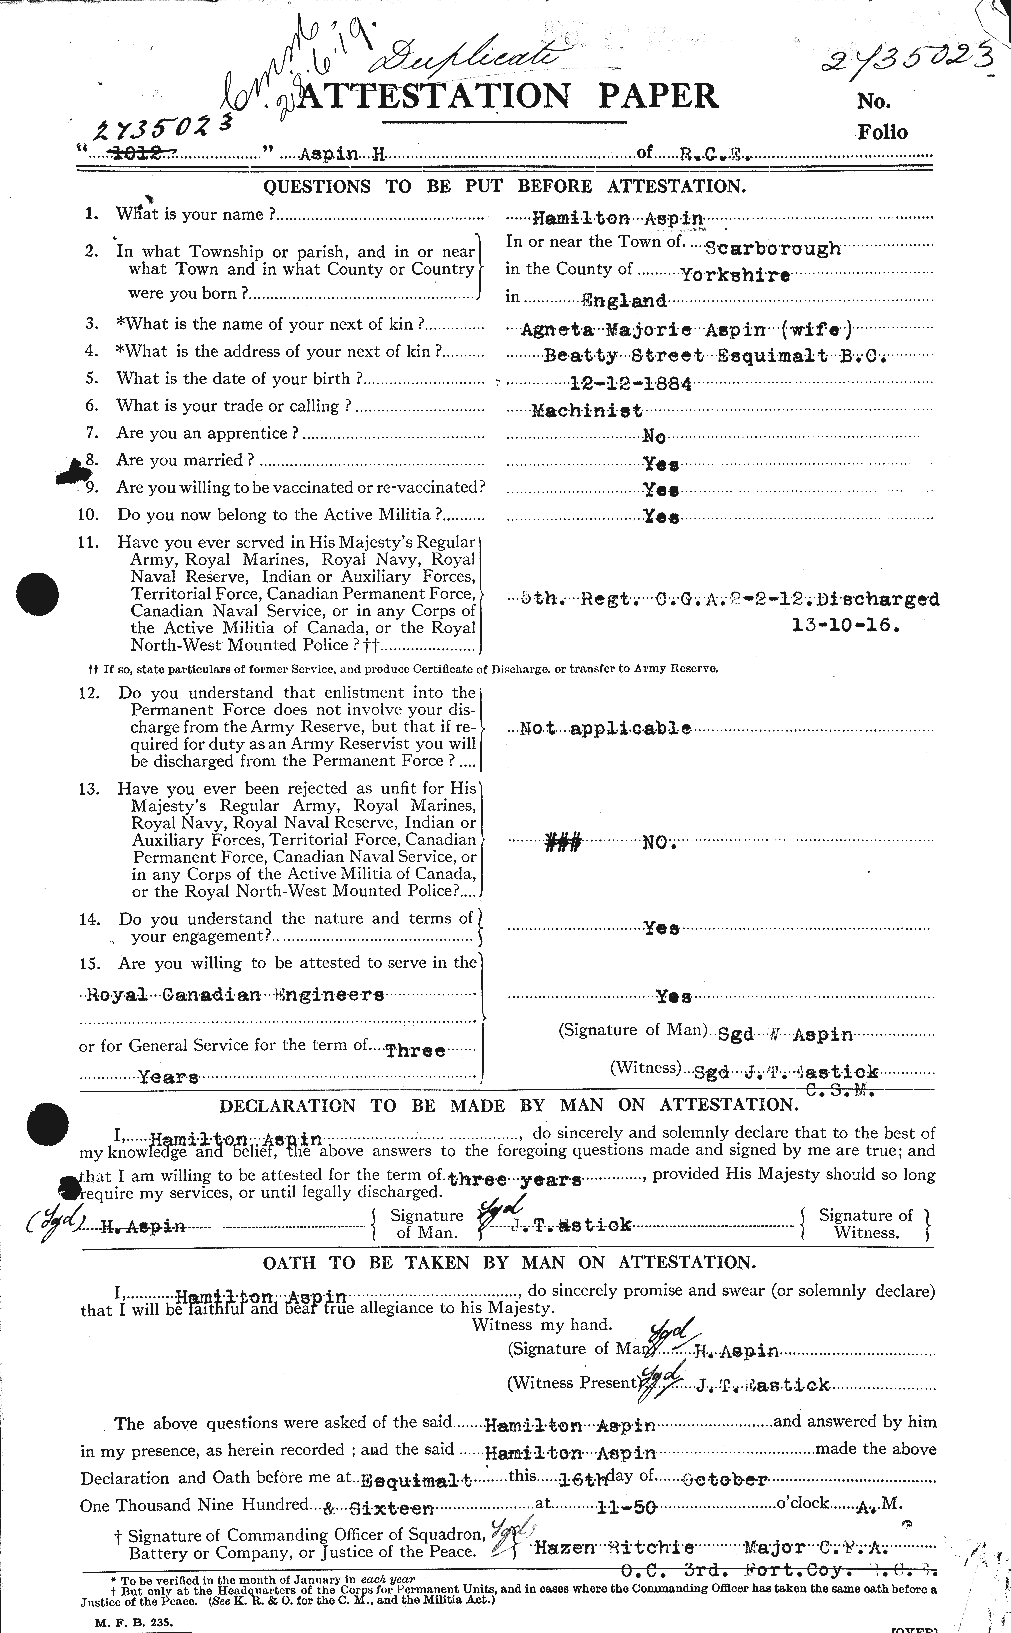 Personnel Records of the First World War - CEF 223586a